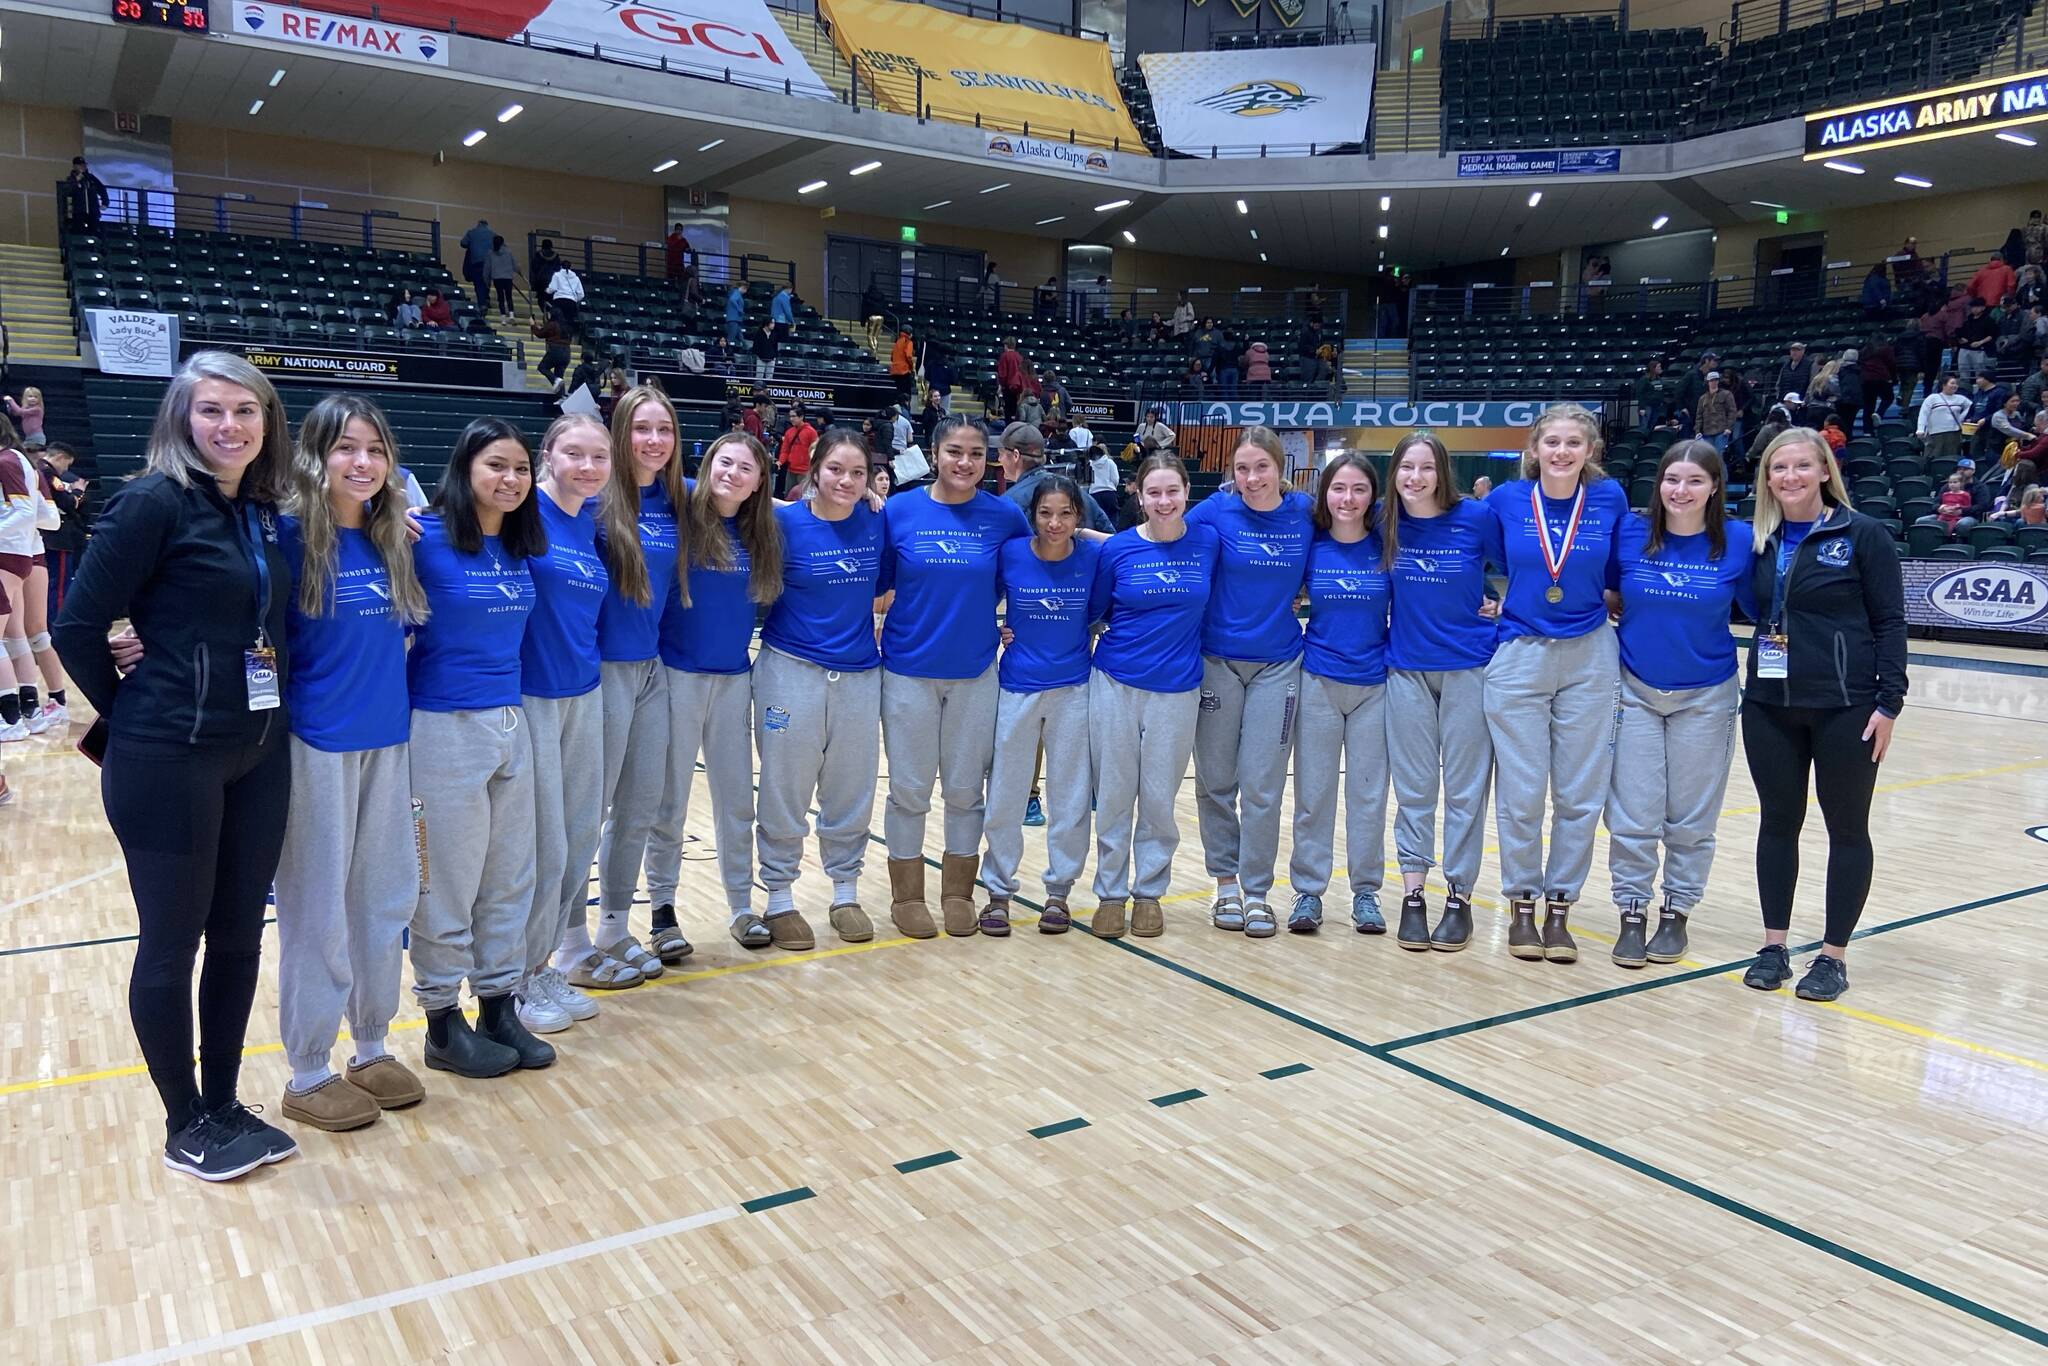 The 2022-23 Thunder Mountain girls varsity volleyball team poses for a group photo during 2022 3A/4A Volleyball State Championships in Anchorage on Thursday and Friday, Nov. 10 and 11. (Courtesy Photo / Julie Herman)